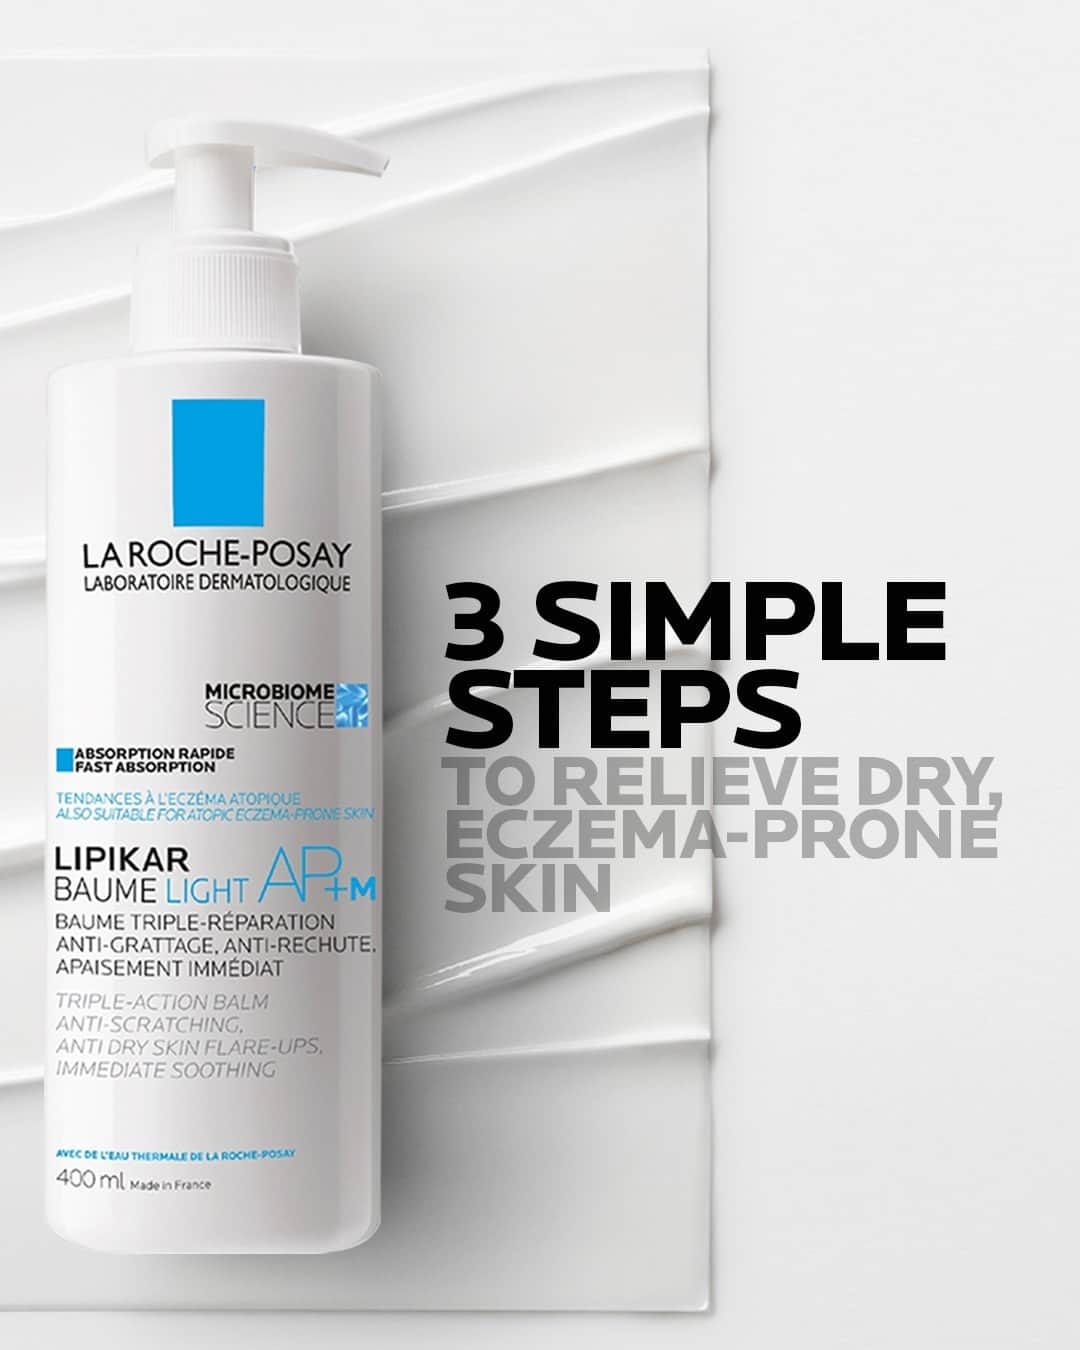 La Roche-Posayのインスタグラム：「With summer around the corner, it's easy to be less focused on caring for your dry skin. To keep flare-ups and scratching at bay, you can count on Lipikar AP+M Body Hydrating Cream. With a complex of unique ingredients, this triple-repair lipid-replenishing light cream makes caring for dry and eczema-prone skin as easy as 1, 2, 3.   ⚖️ The exclusive AP+M complex rebalances the skin microbiome, for a healthier skin barrier. 💧 The shea butter helps  strengthen the skin's hydrolipidic film, for smoother and more resilient skin. ✌️ The niacinamide helps reduce itchiness, for more peaceful days and nights.   Do you suffer from dry skin? If you have a favorite Lipikar product, we would love to hear about it in the comments section. 👇  All languages spoken here! Feel free to talk to us at anytime. #larocheposay #lipikar #eczemaproneskin #sensitiveskin Global official page from La Roche-Posay, France.」